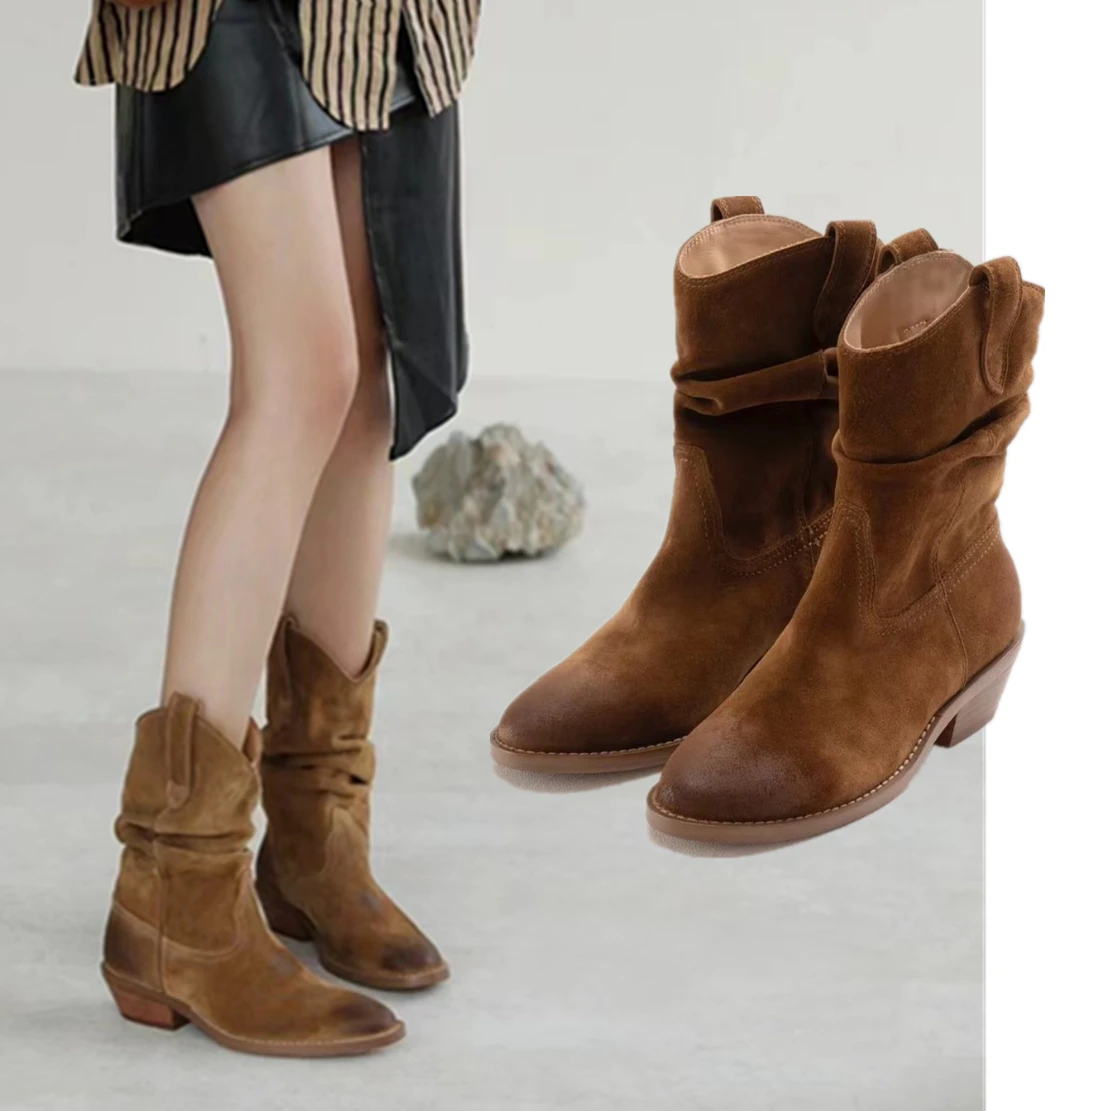 

Jenny&Dave Brushed Boots Shoes Cow Suede Knight Boots Women Western Thick Fashion Retro Casual Heel Ladies